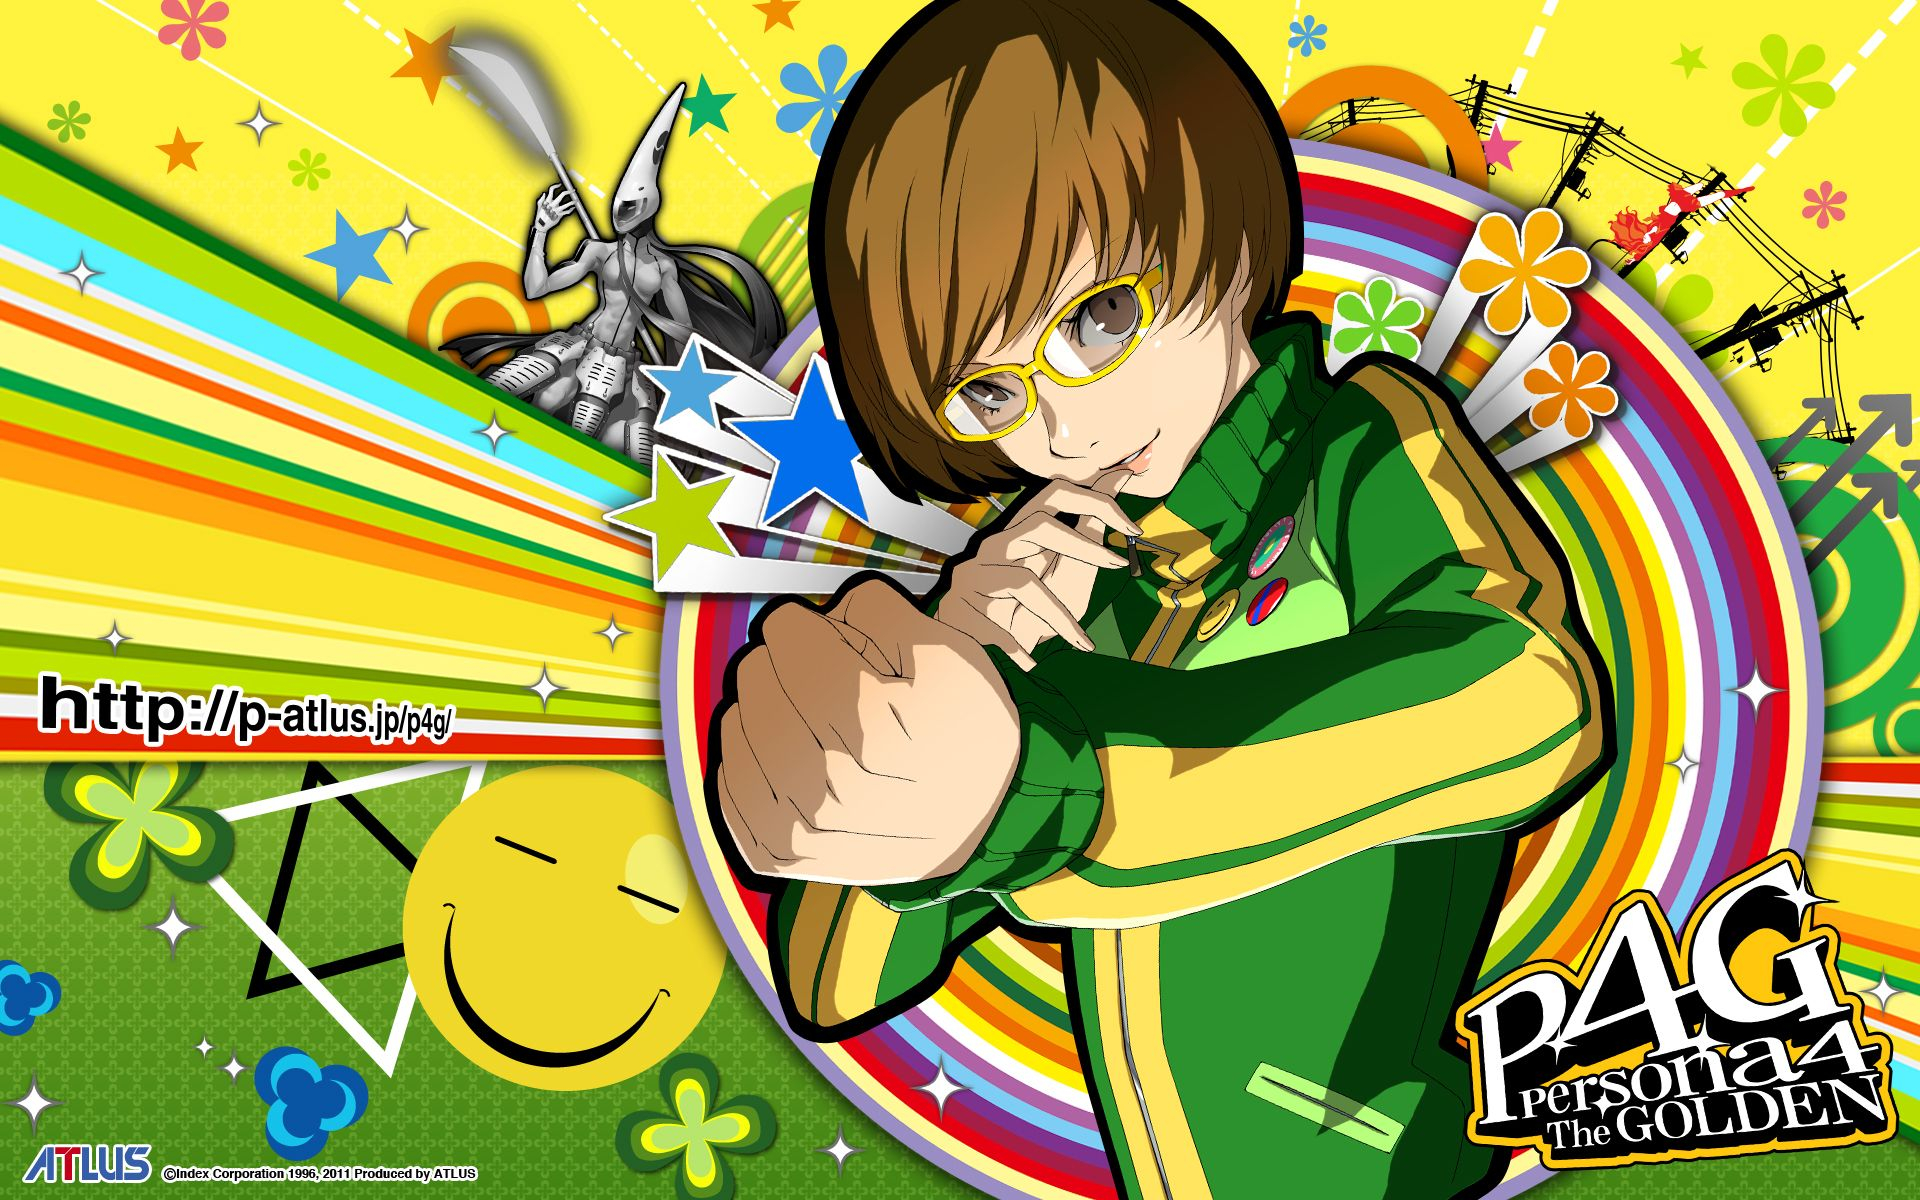 1920x1200 Persona Reveal Imminent With Hints all Around | Persona 4 wallpaper, Persona 4, Persona